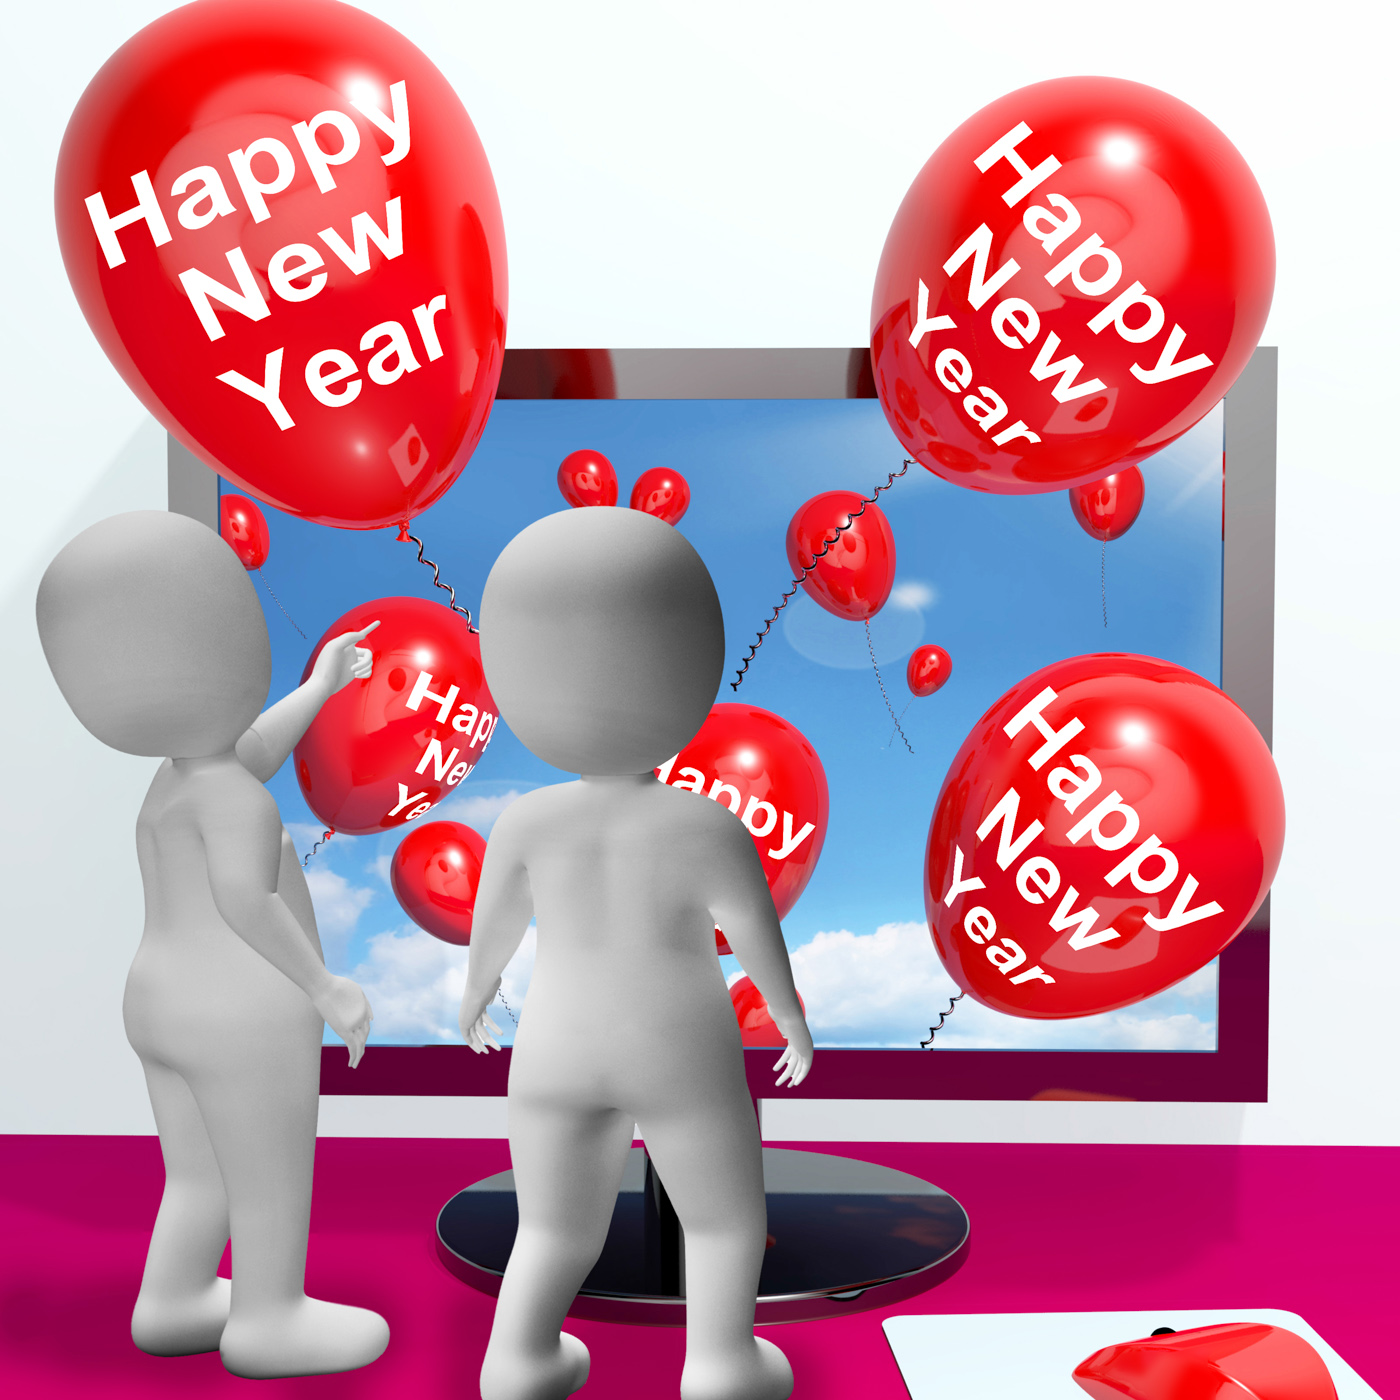 Happy New Year Balloons Show Online Celebration and Invitations, Balloon, New, Www, Web, HQ Photo